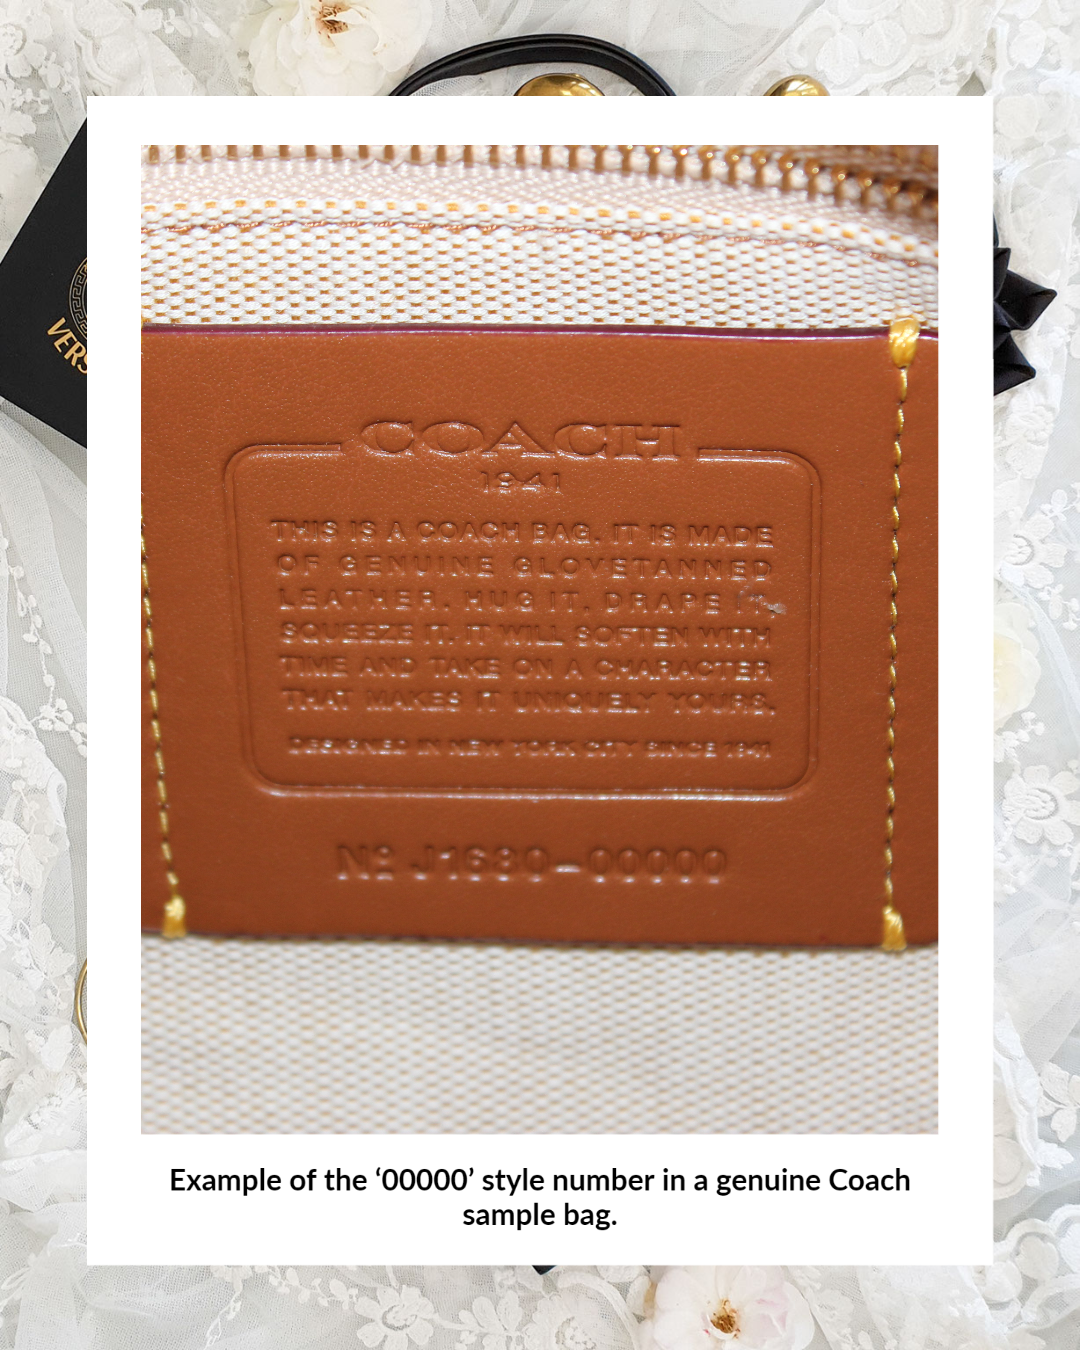 How to Buy Authentic Coach on : 5 Basic Ways to Tell If a